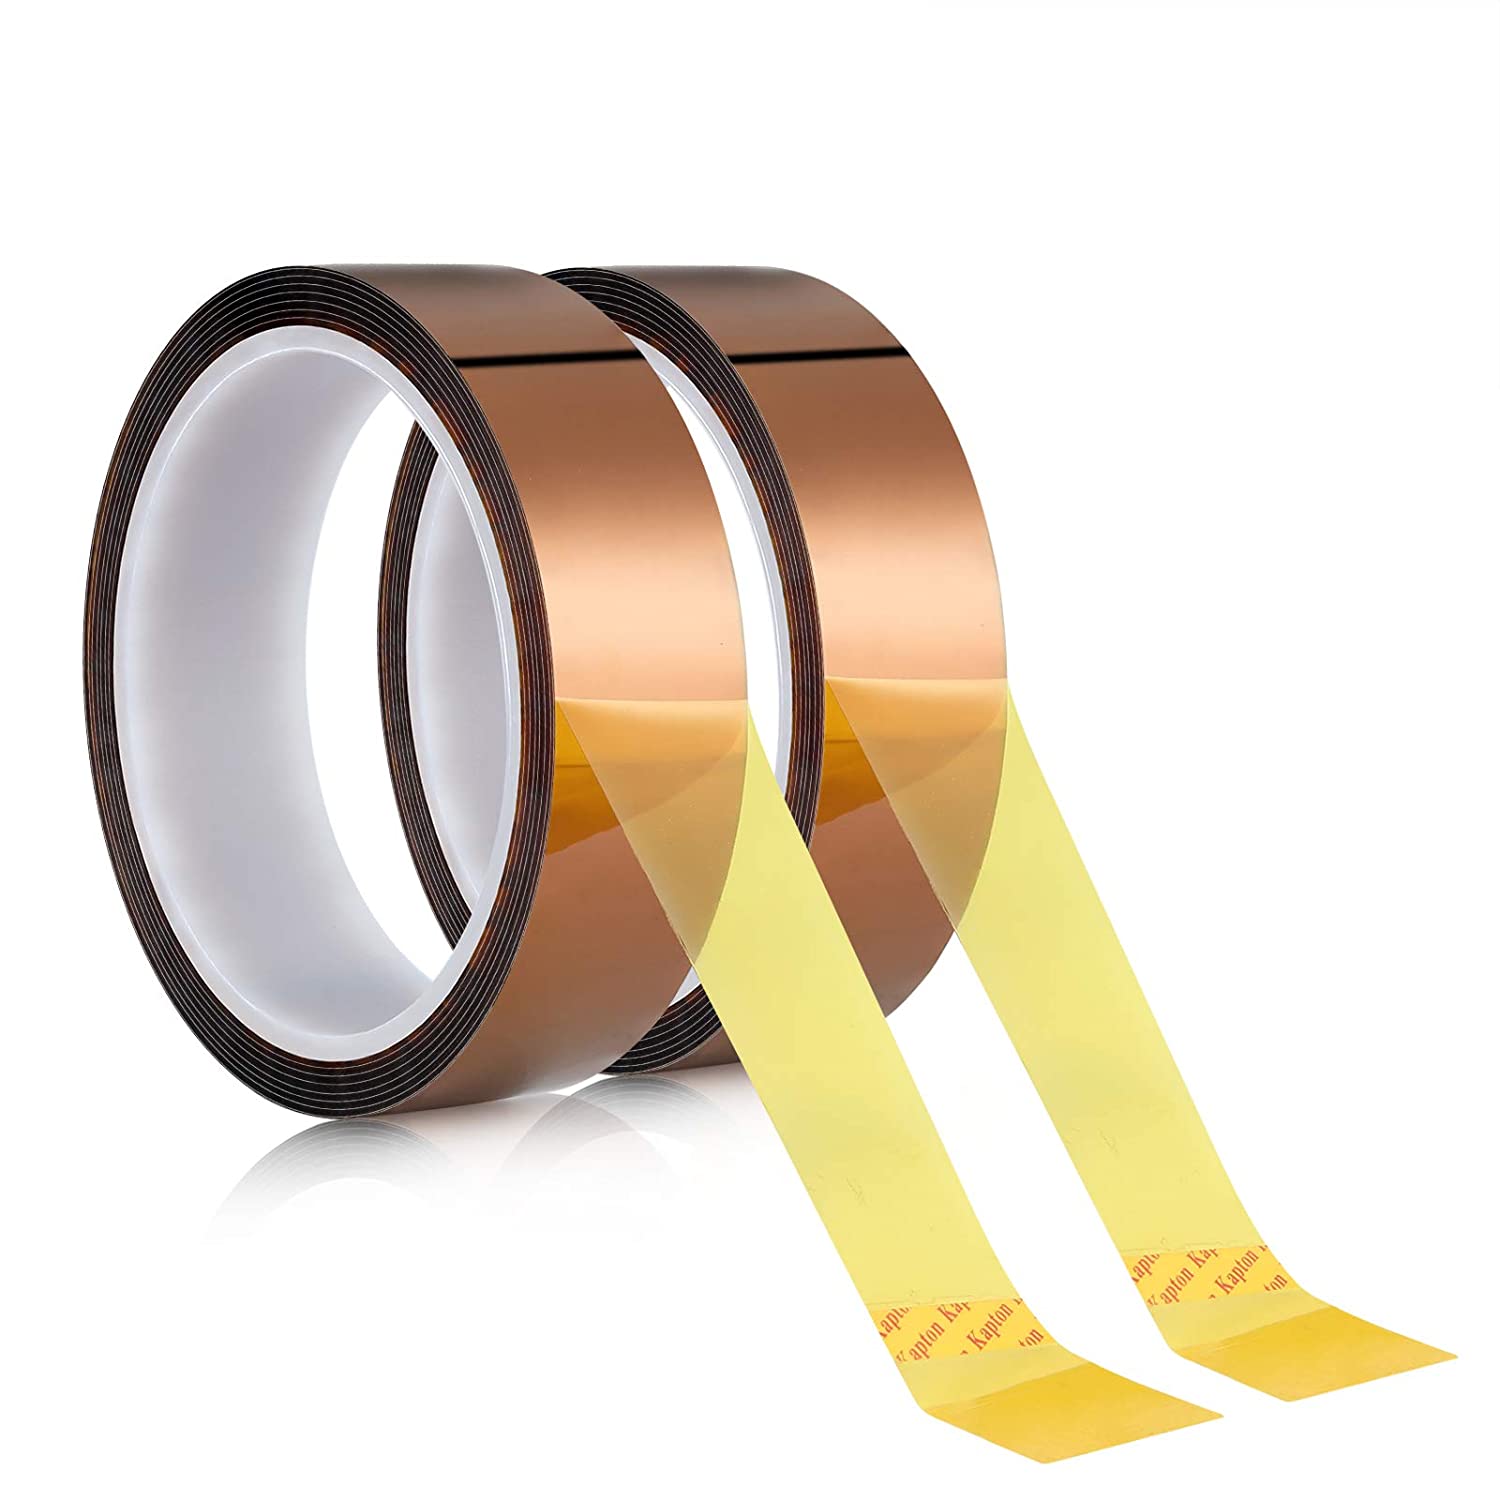 5 Pieces of Heat Resistant Transfer Tape for Sublimation - Leaves No-Mark or Residue, Strong Adhesive Kapton Tape Perfect for Heat Press, 3D Printer